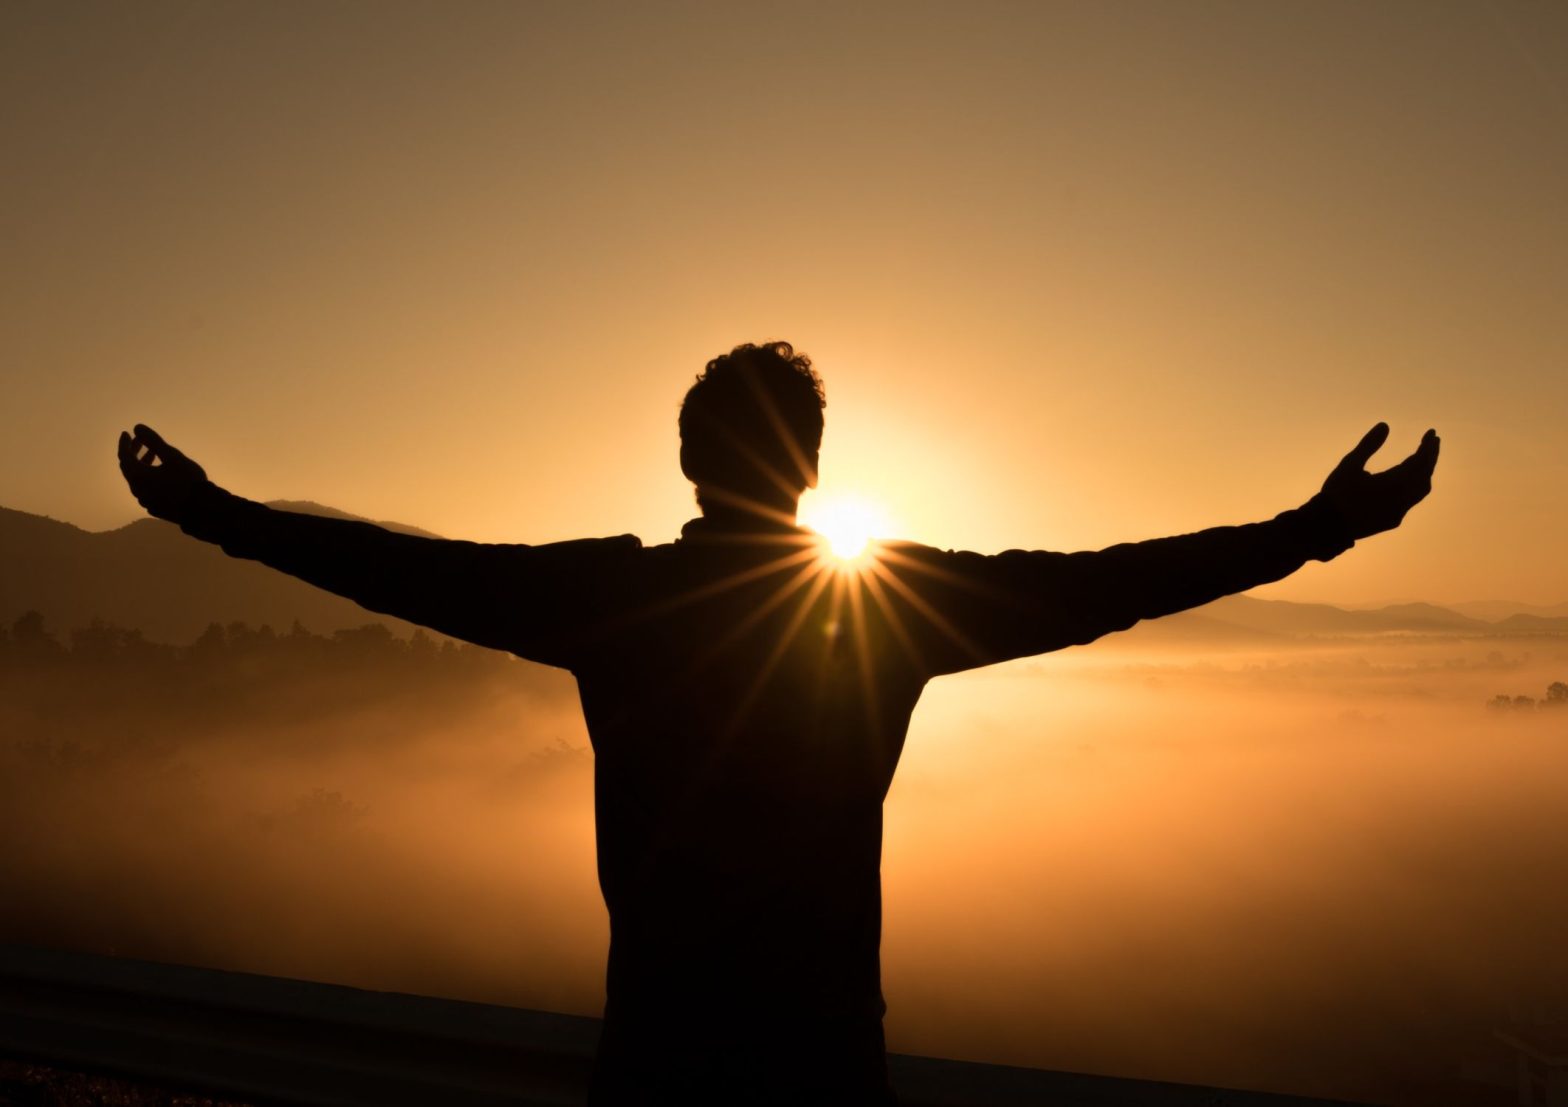 Person standing with their arms out wide mindfully soaking in the moment for the good of their mental health and wellbeing, during a beautiful sunrise